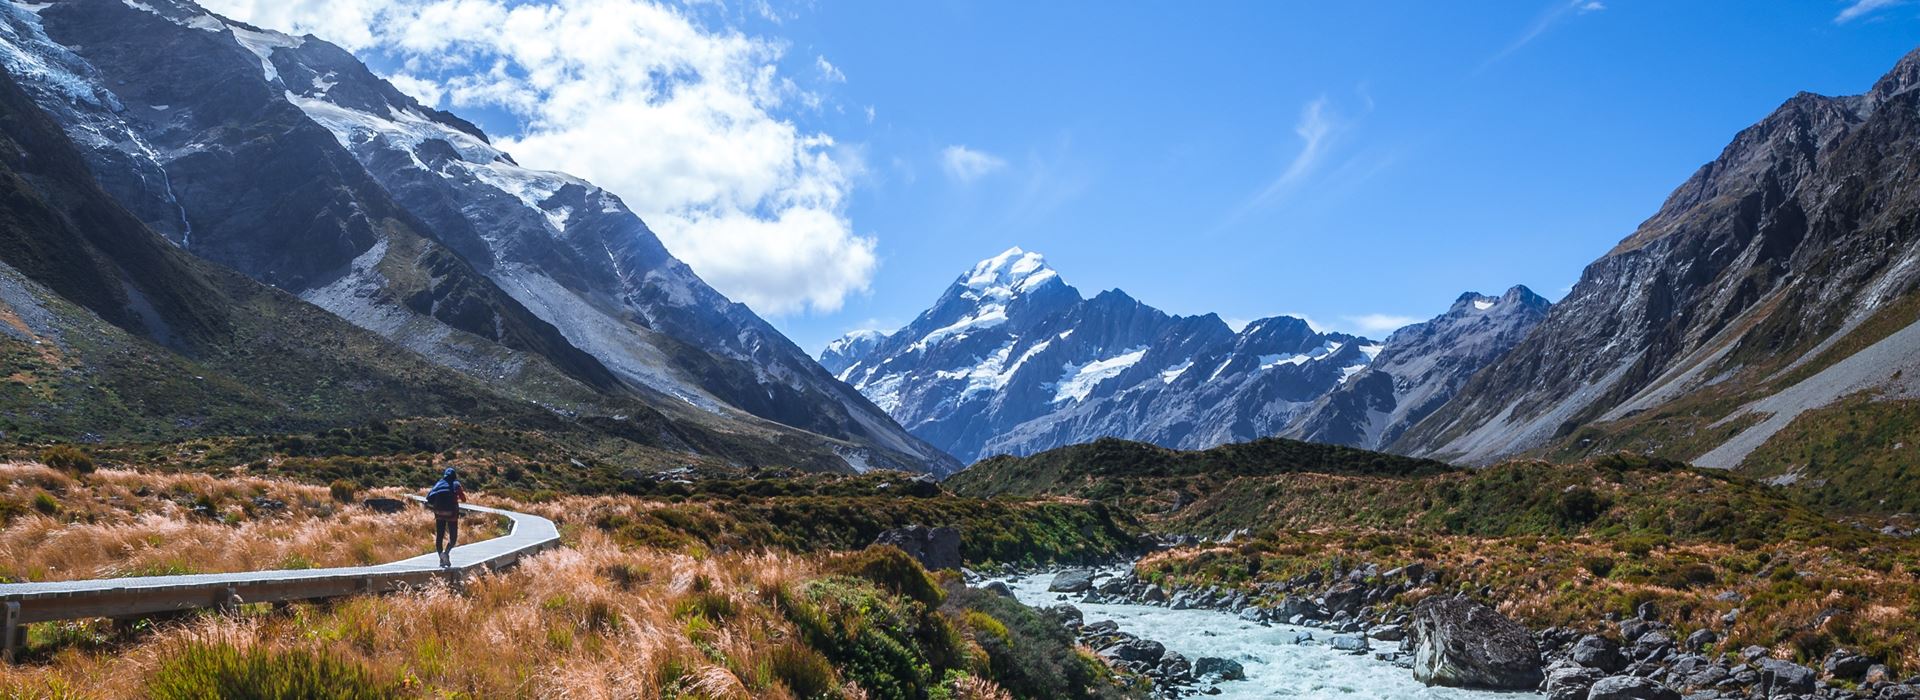 8 Day - Taste of North & South Islands Tour